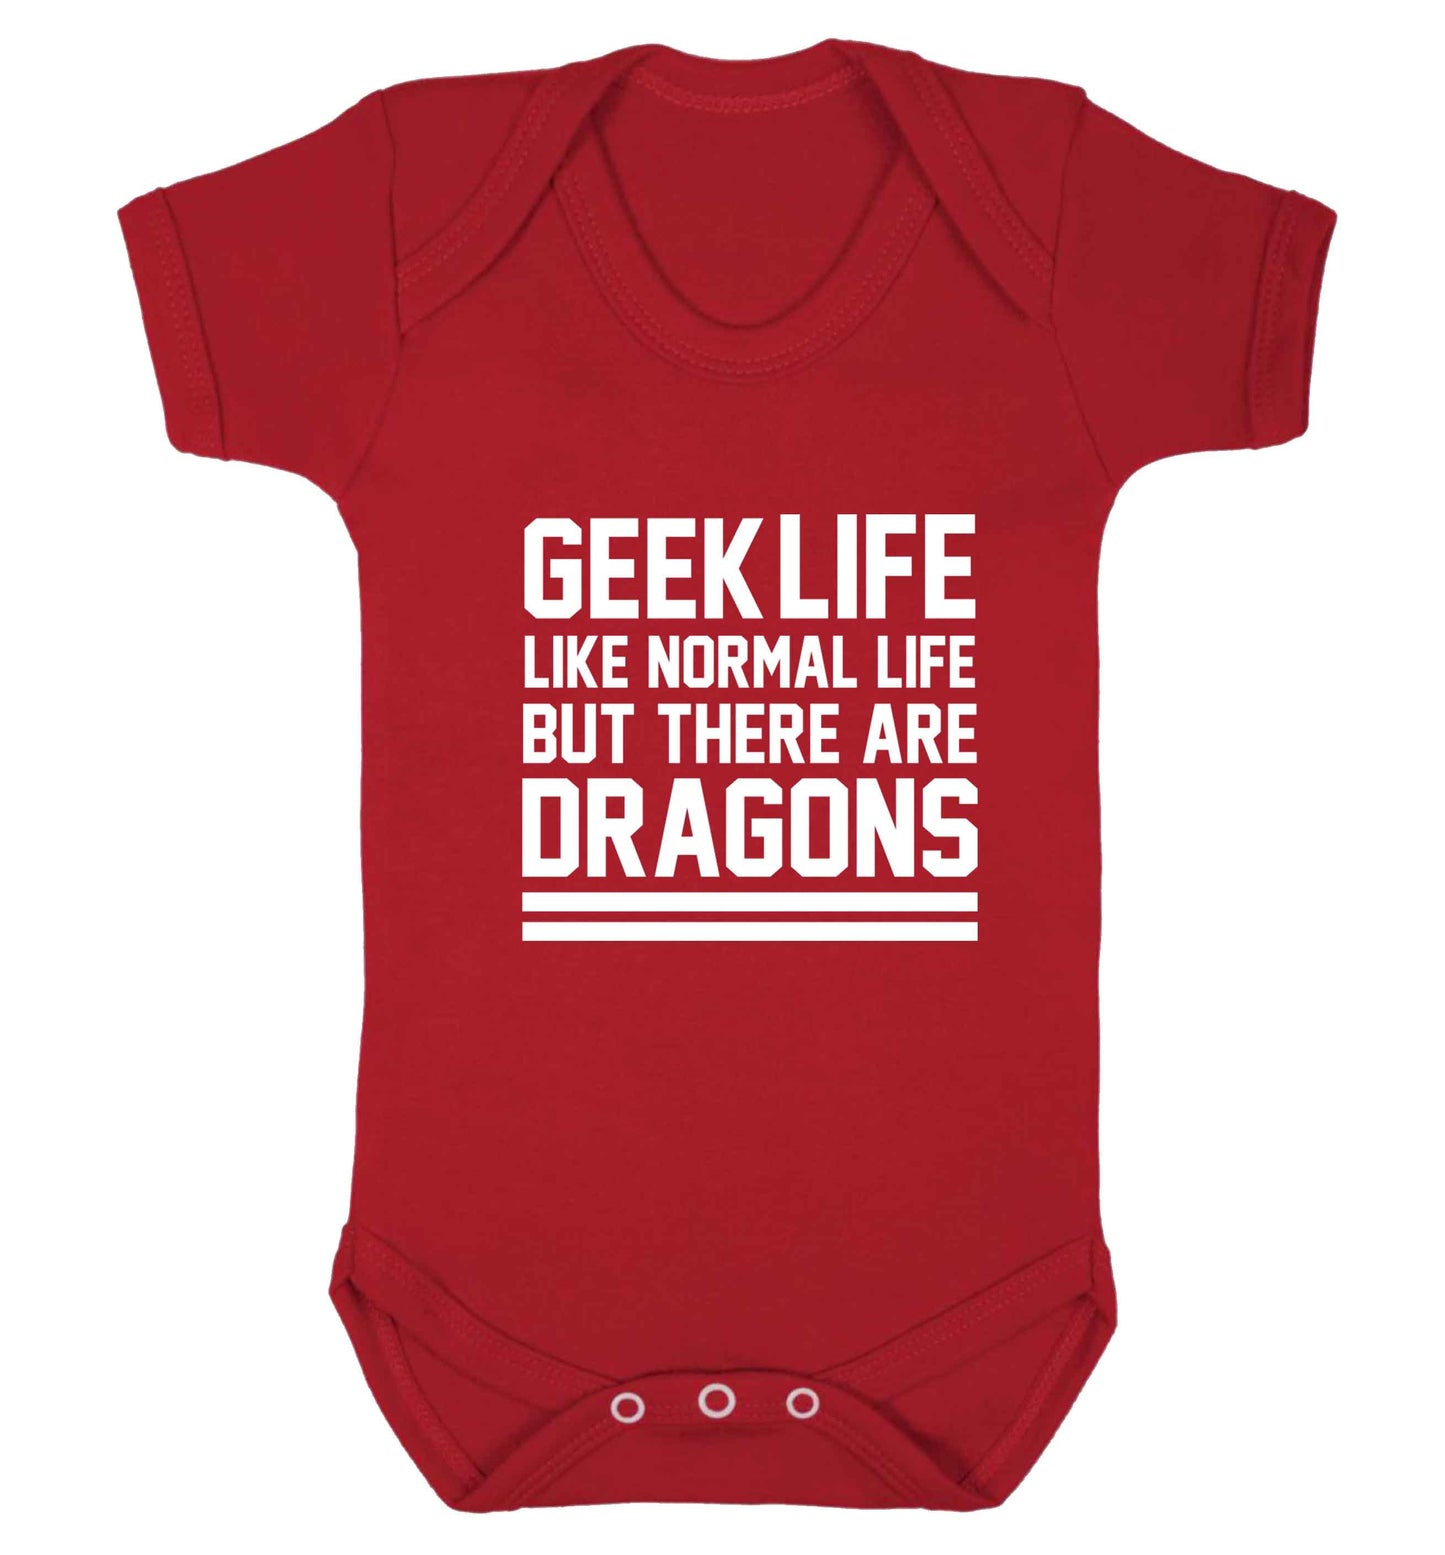 Geek life like normal life but there are dragons baby vest red 18-24 months